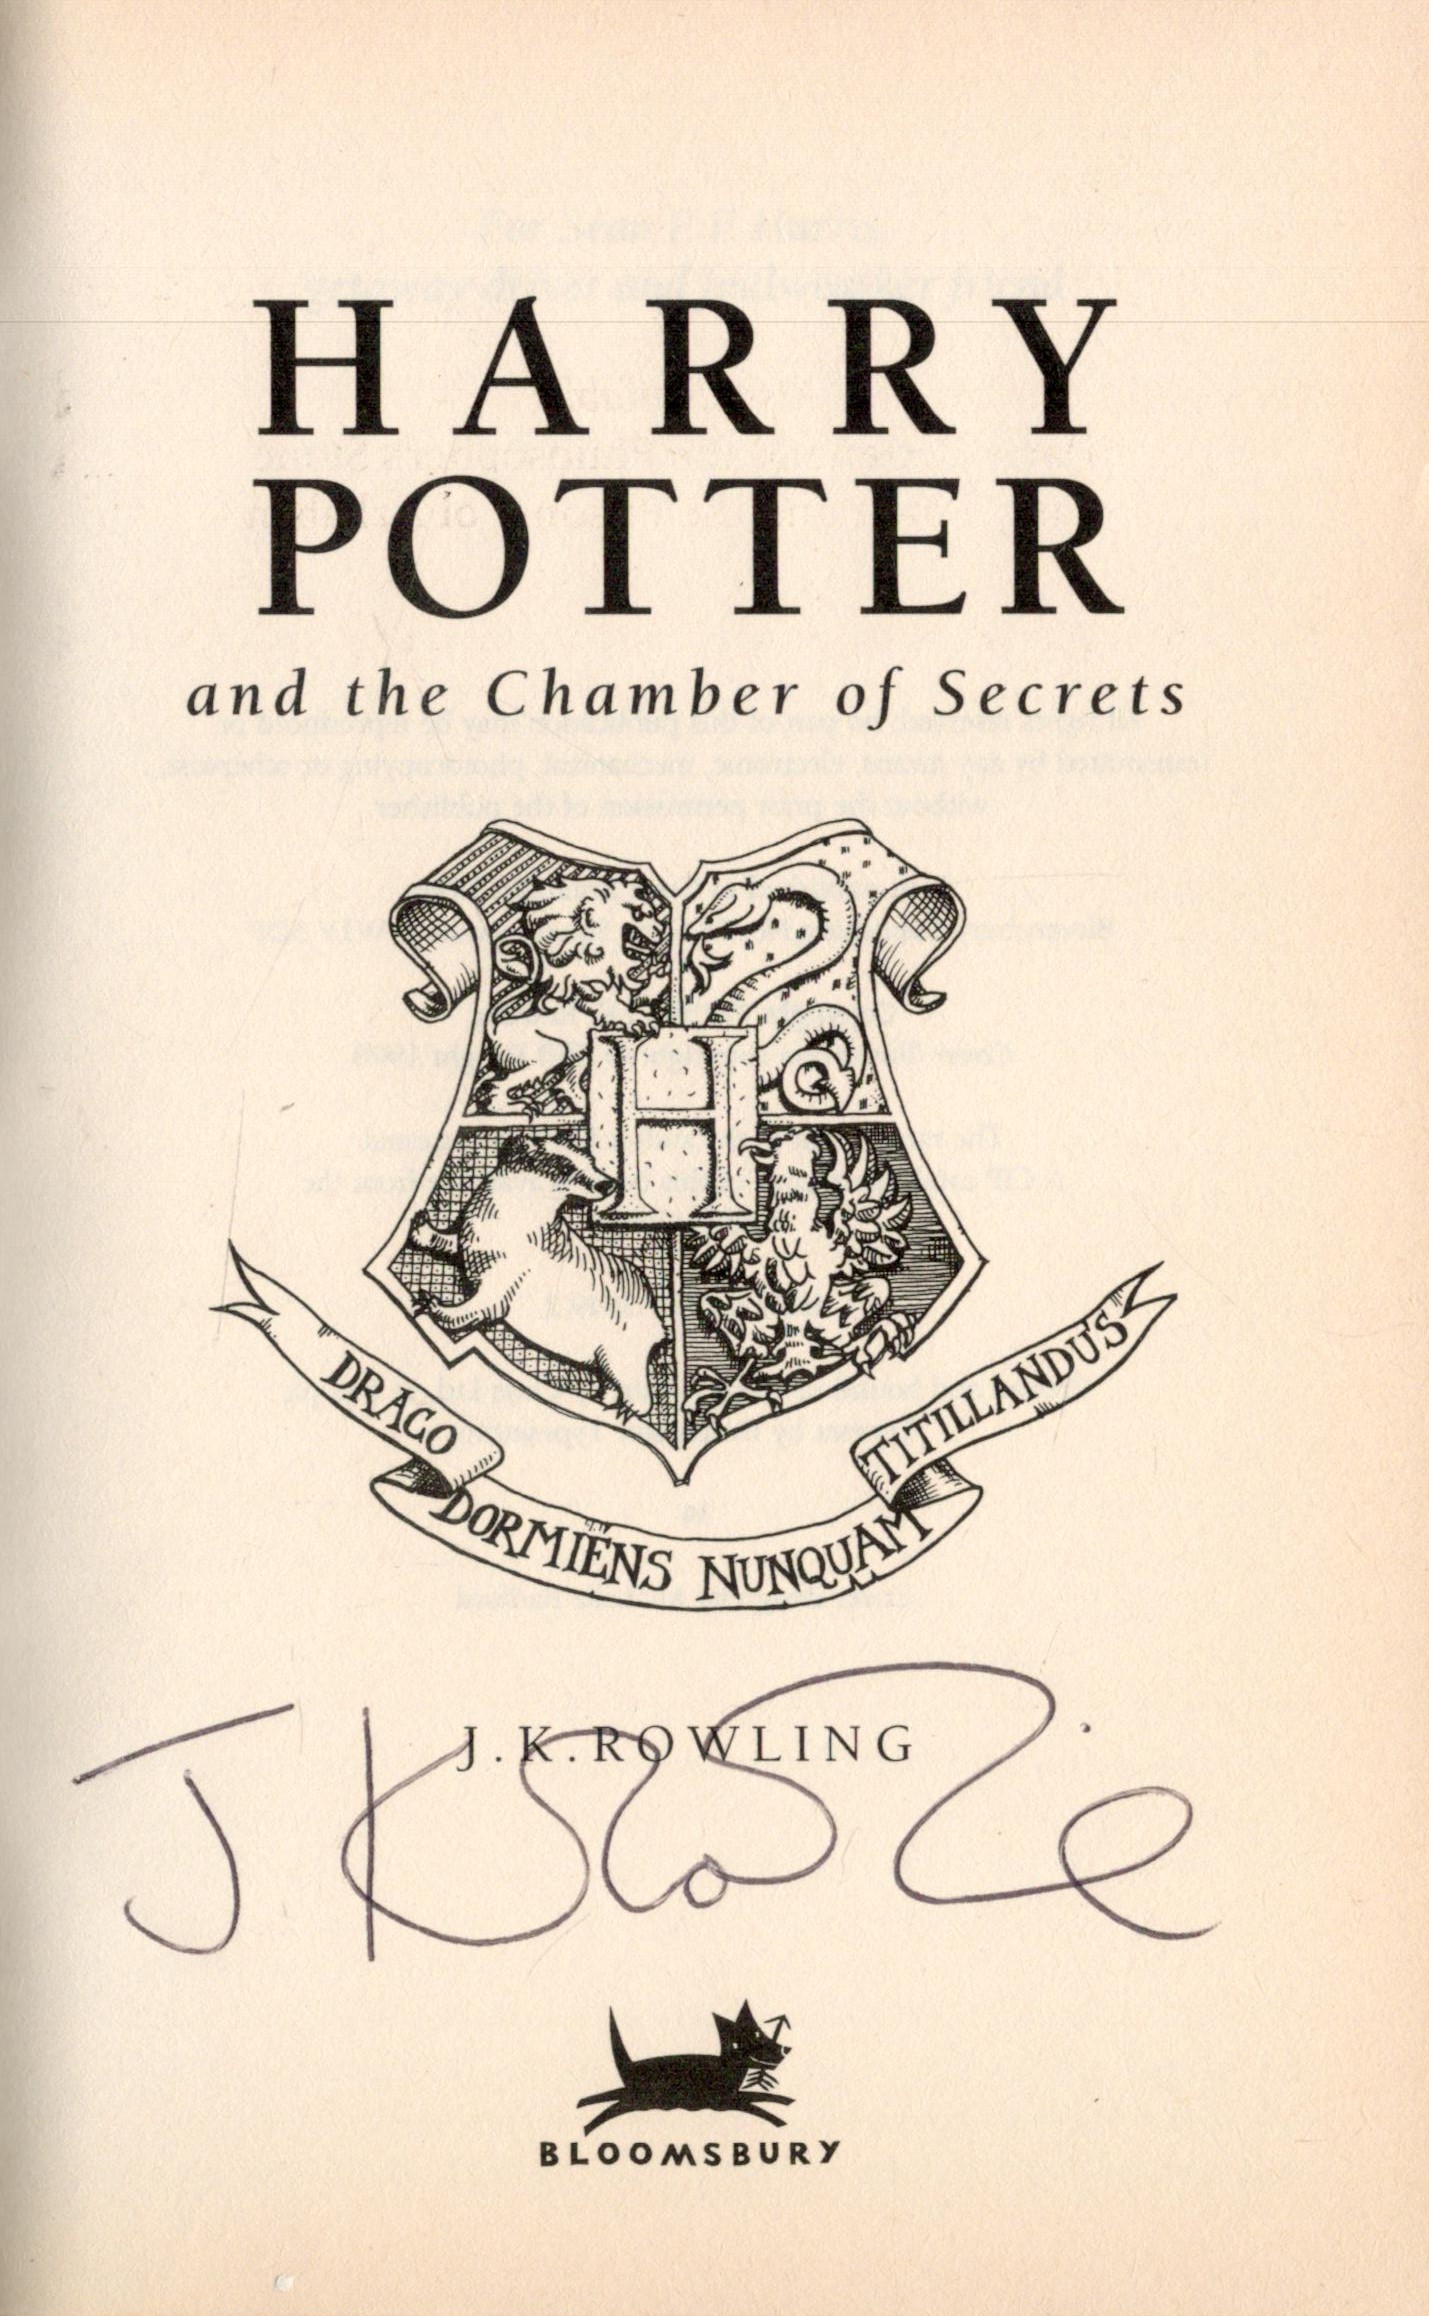 J K Rowling Signed Harry Potter- Chamber of Secrets 1st Edition Hardback Book. Signed on title page. - Image 2 of 3